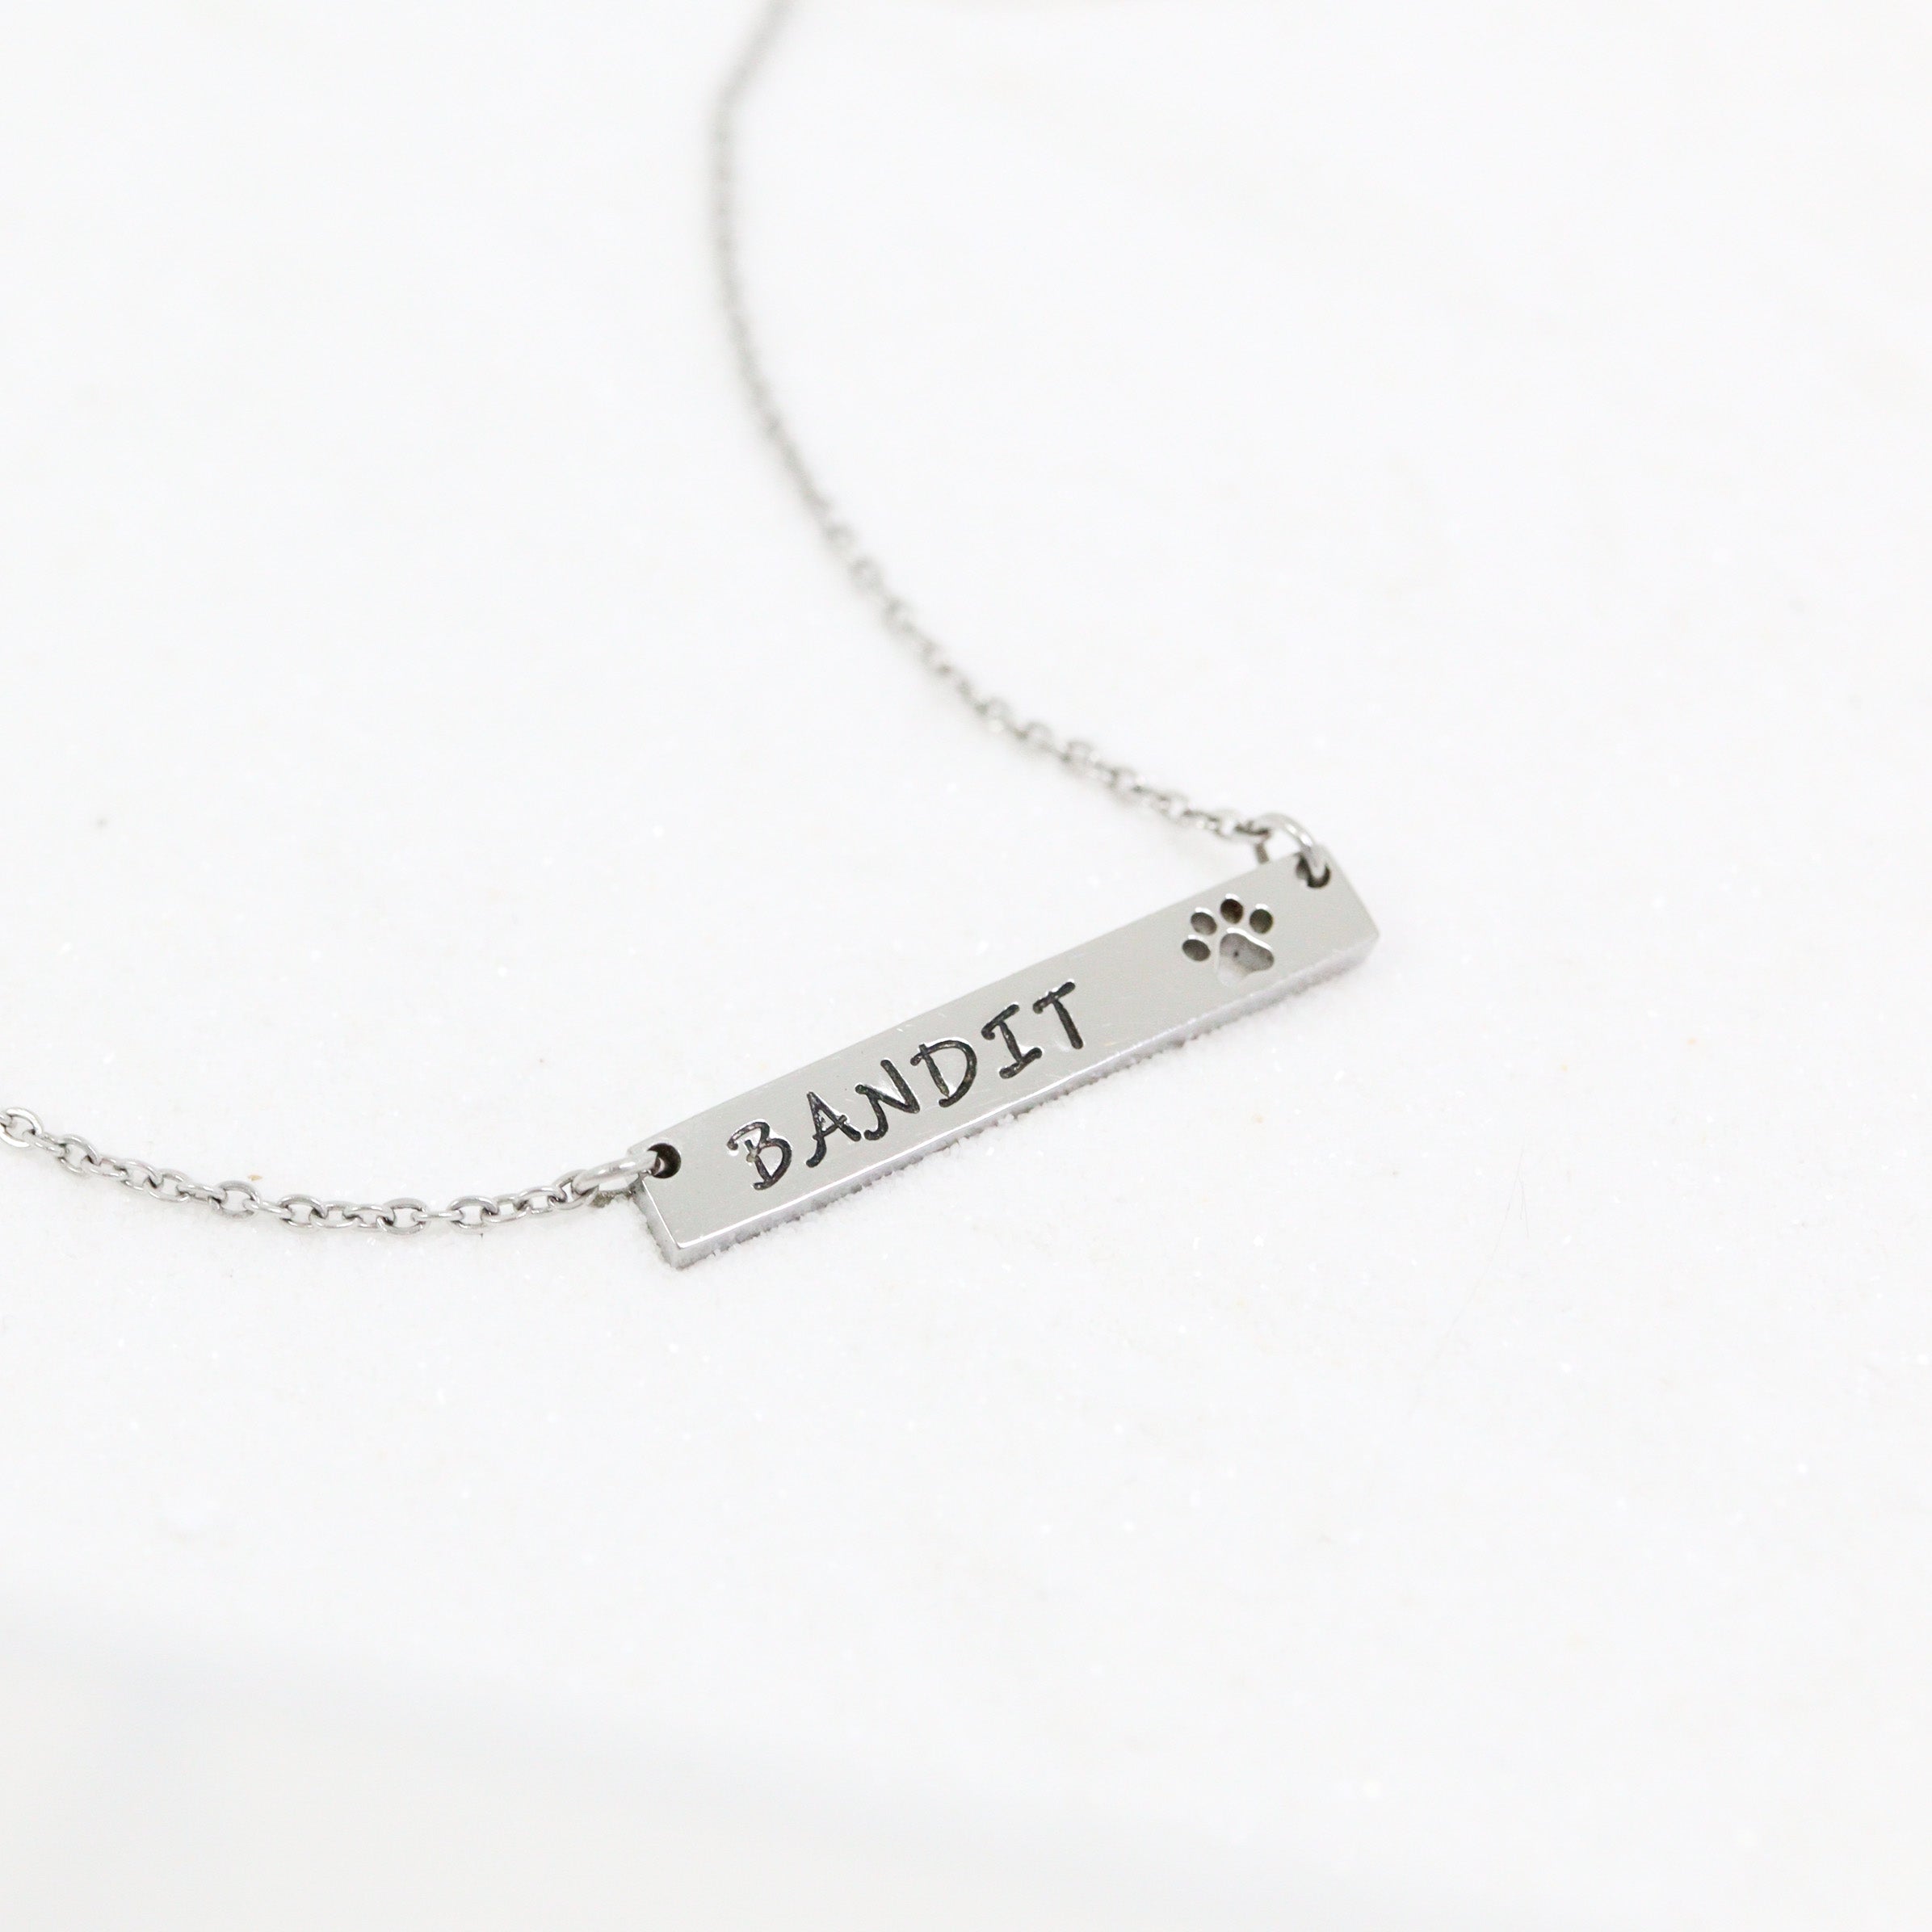 Stainless Steel Blank Cutout Paw Print Bar Necklace / SBB0247